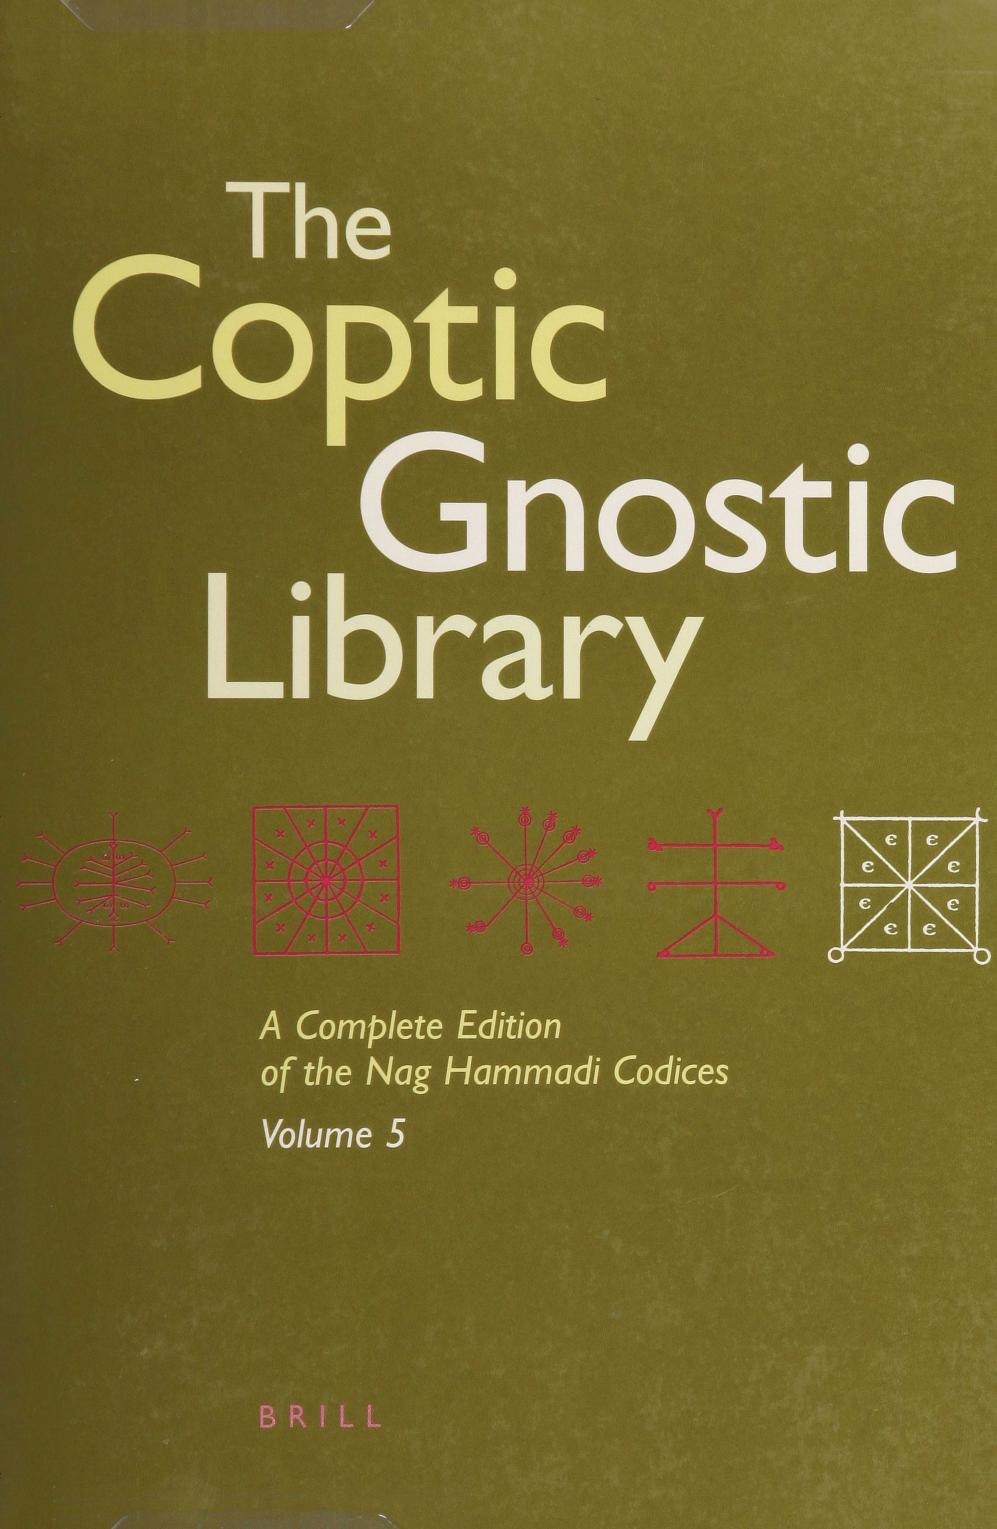 The Coptic Gnostic Library A Complete Edition of the Nag Hammadi Codices Volume 5